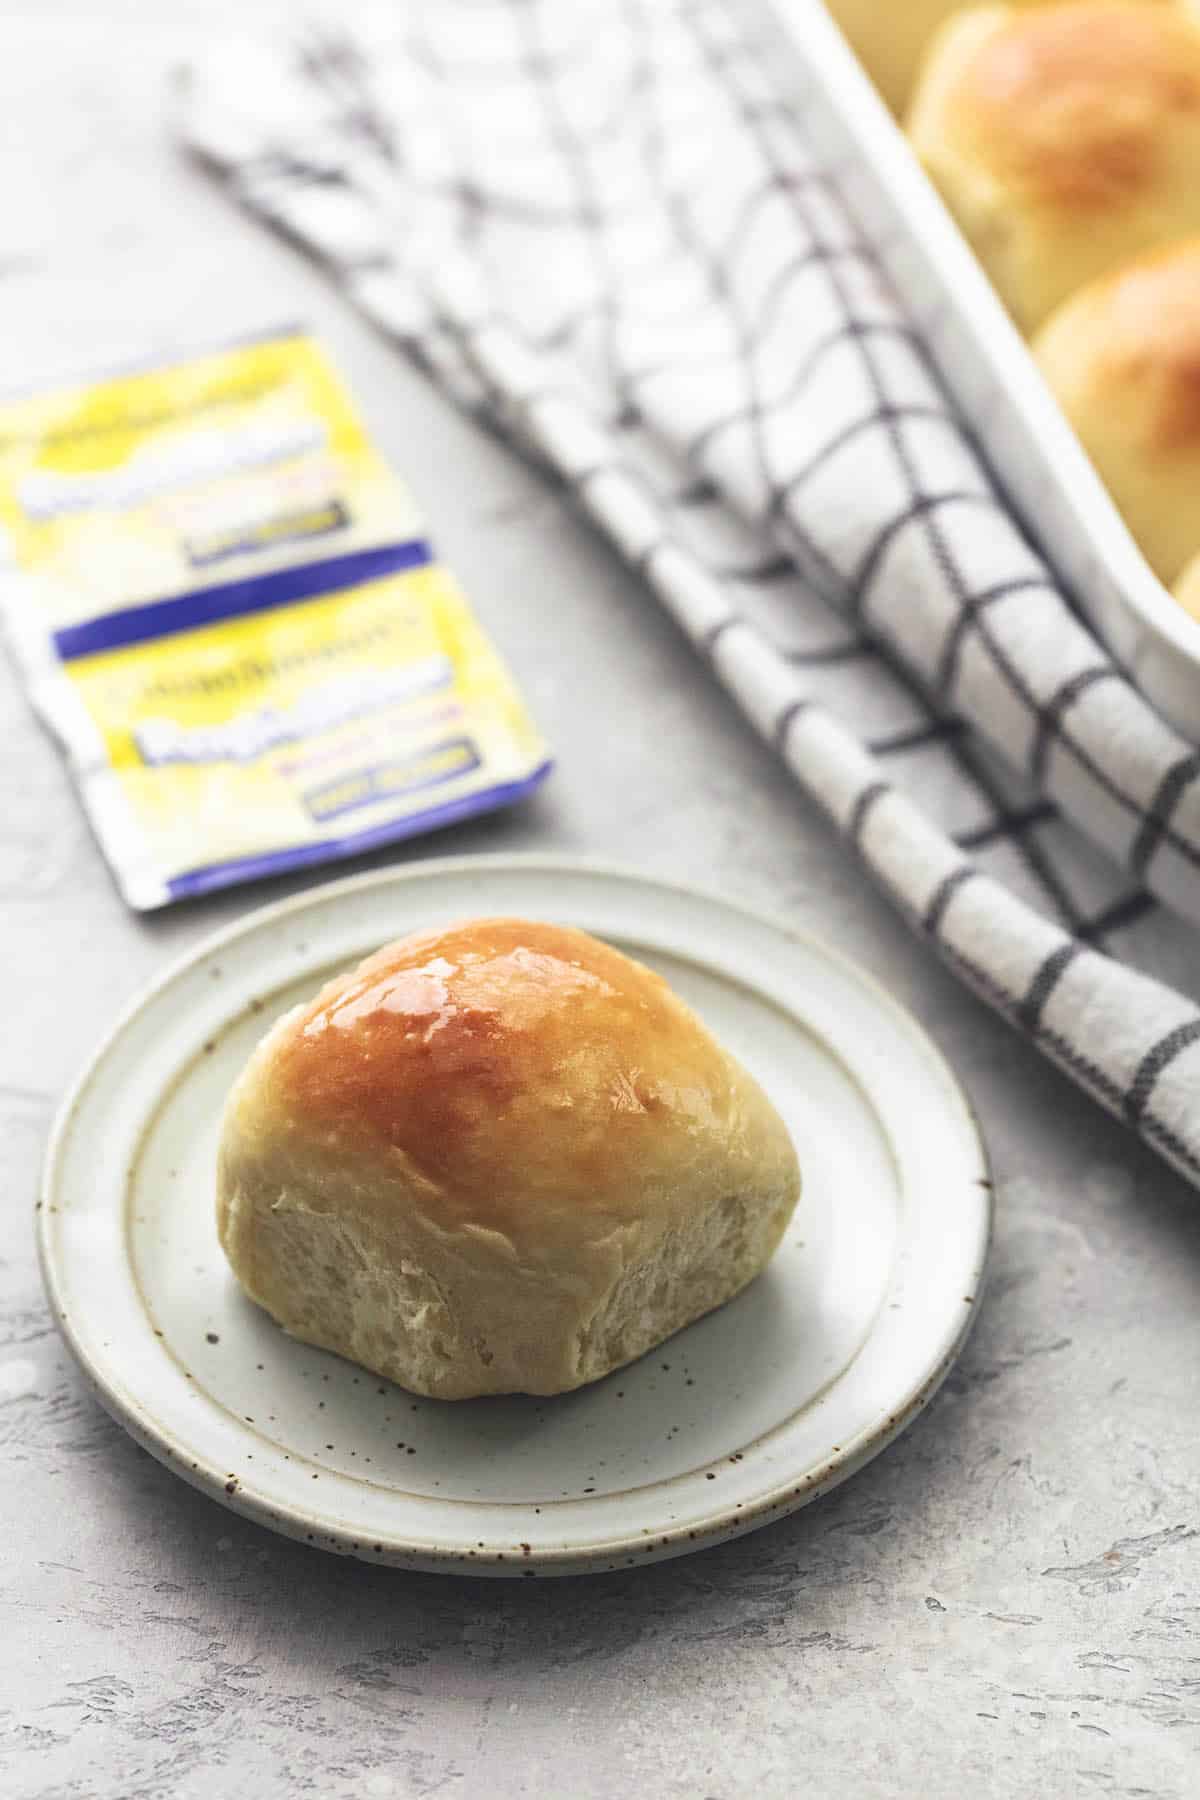 a buttermilk dinner roll on a white plate with yeast packets and baking pan of rolls in background.